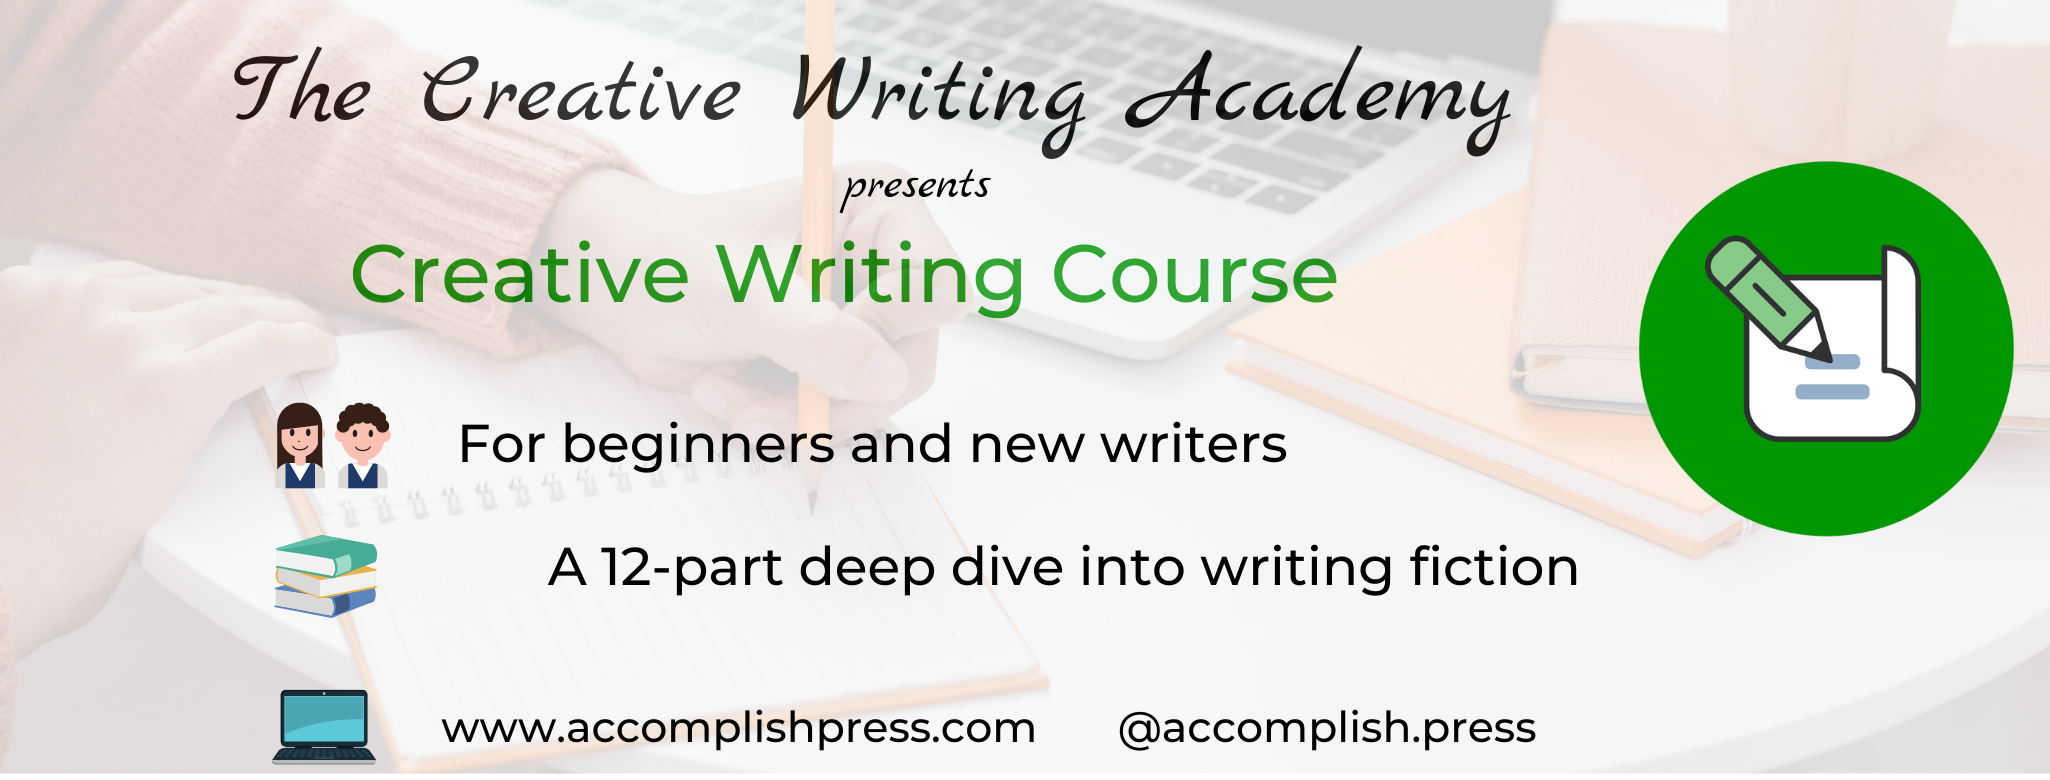 Creative Writing Course for Beginners